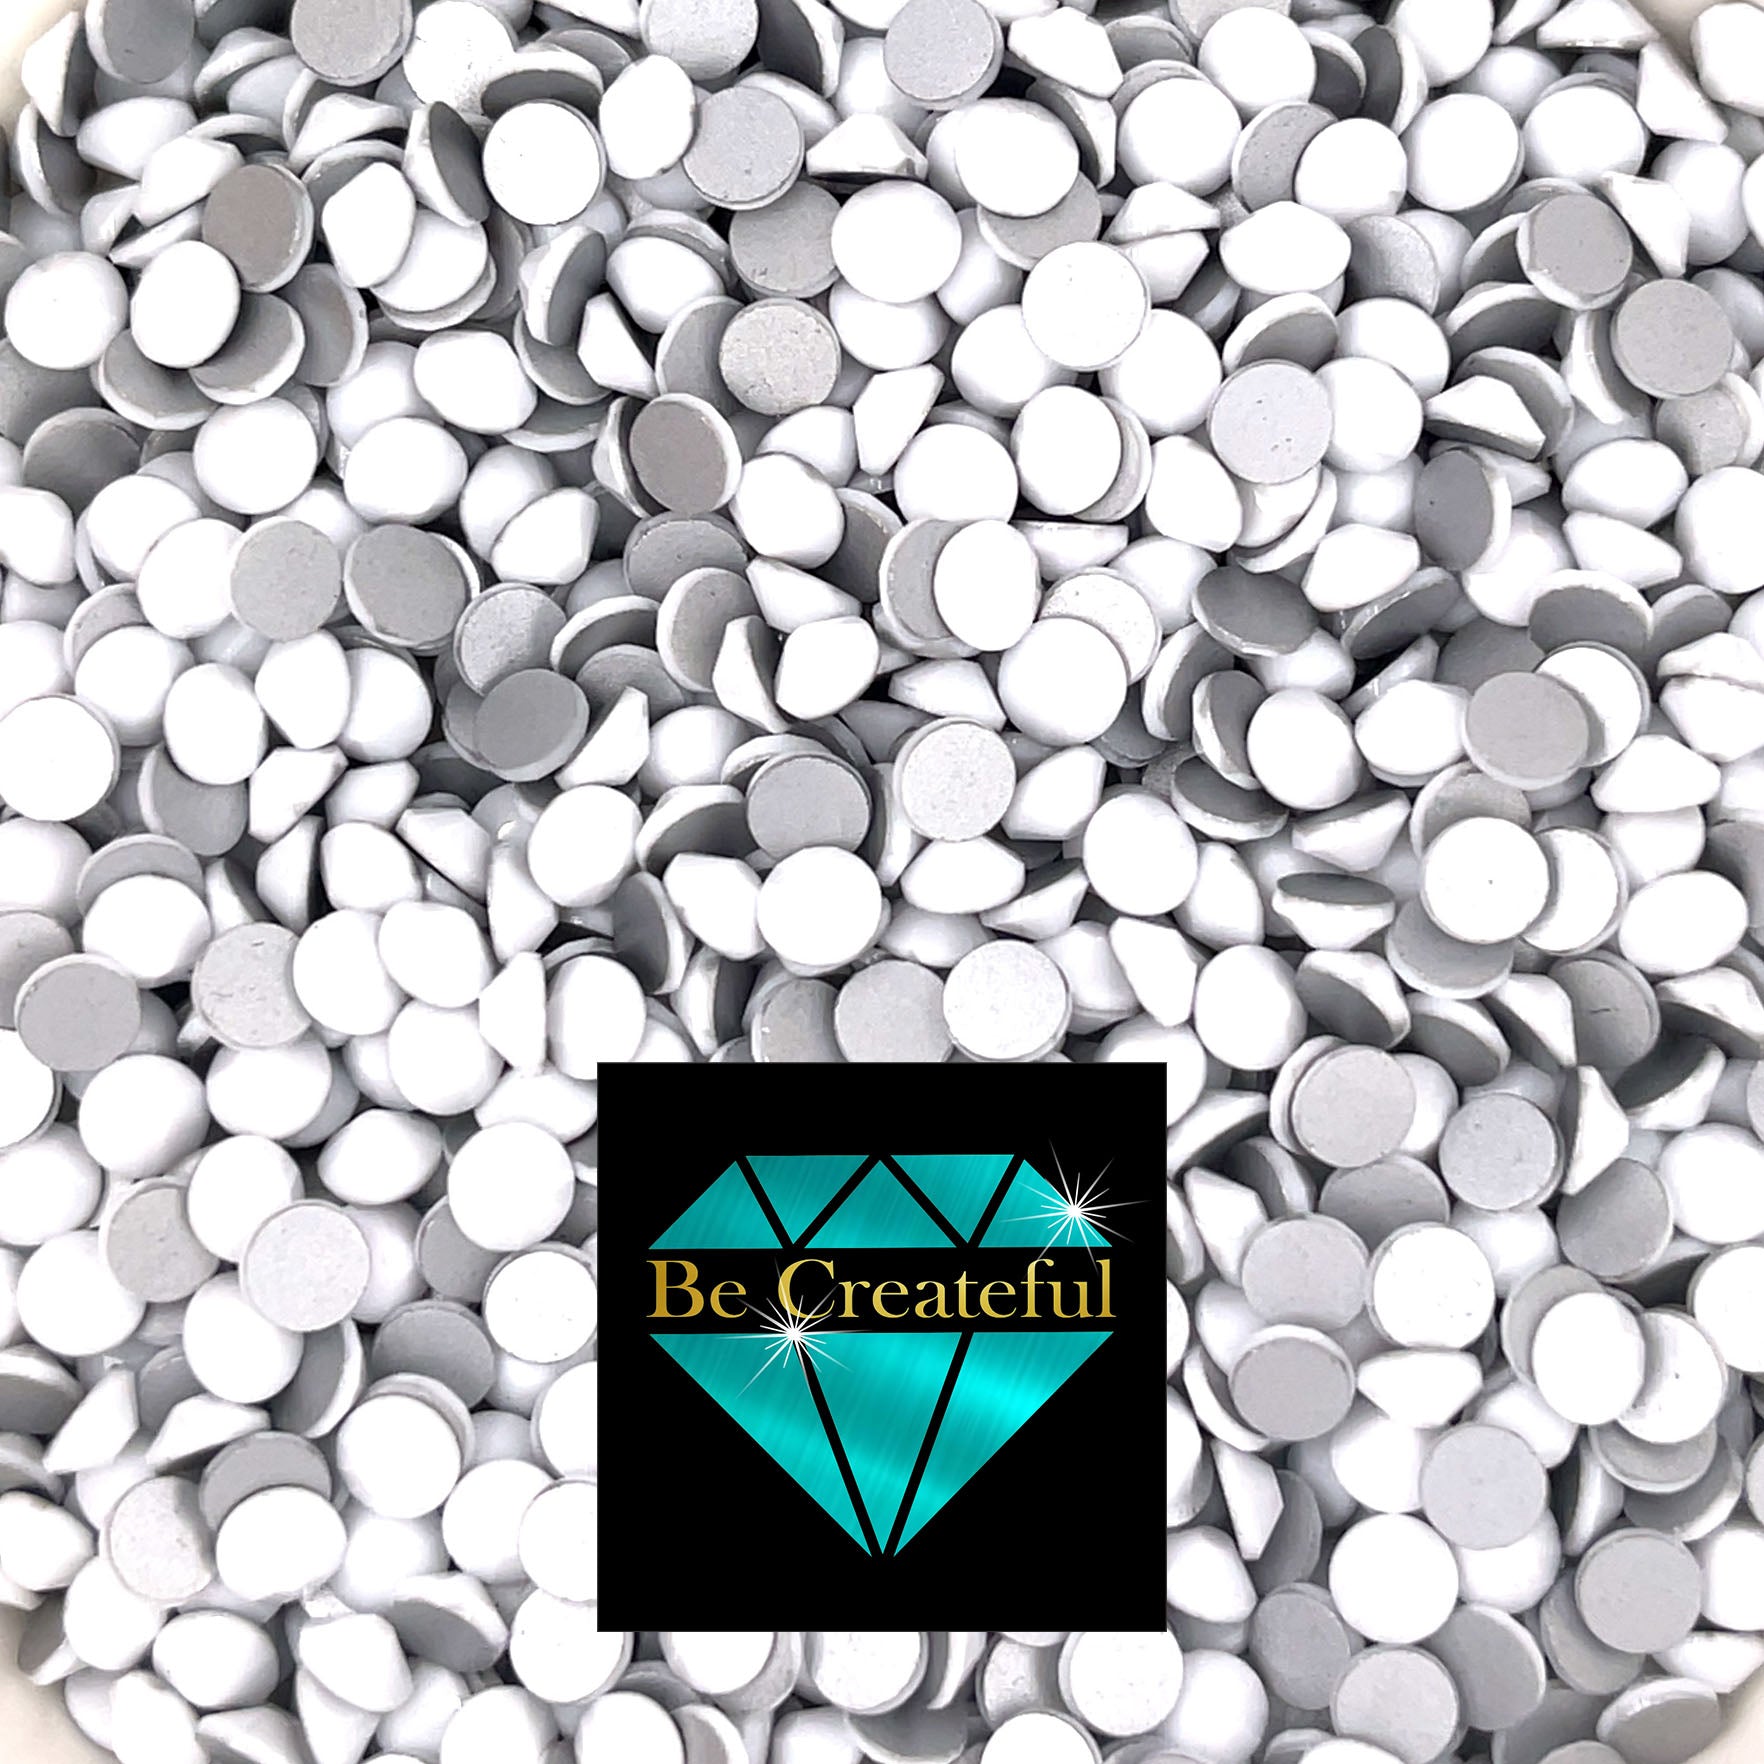 4500pcs Ss6 2mm Flatback Rhinestones In White Ab Color For Nail Art,  Crafts, Glass, Garments And Shoes